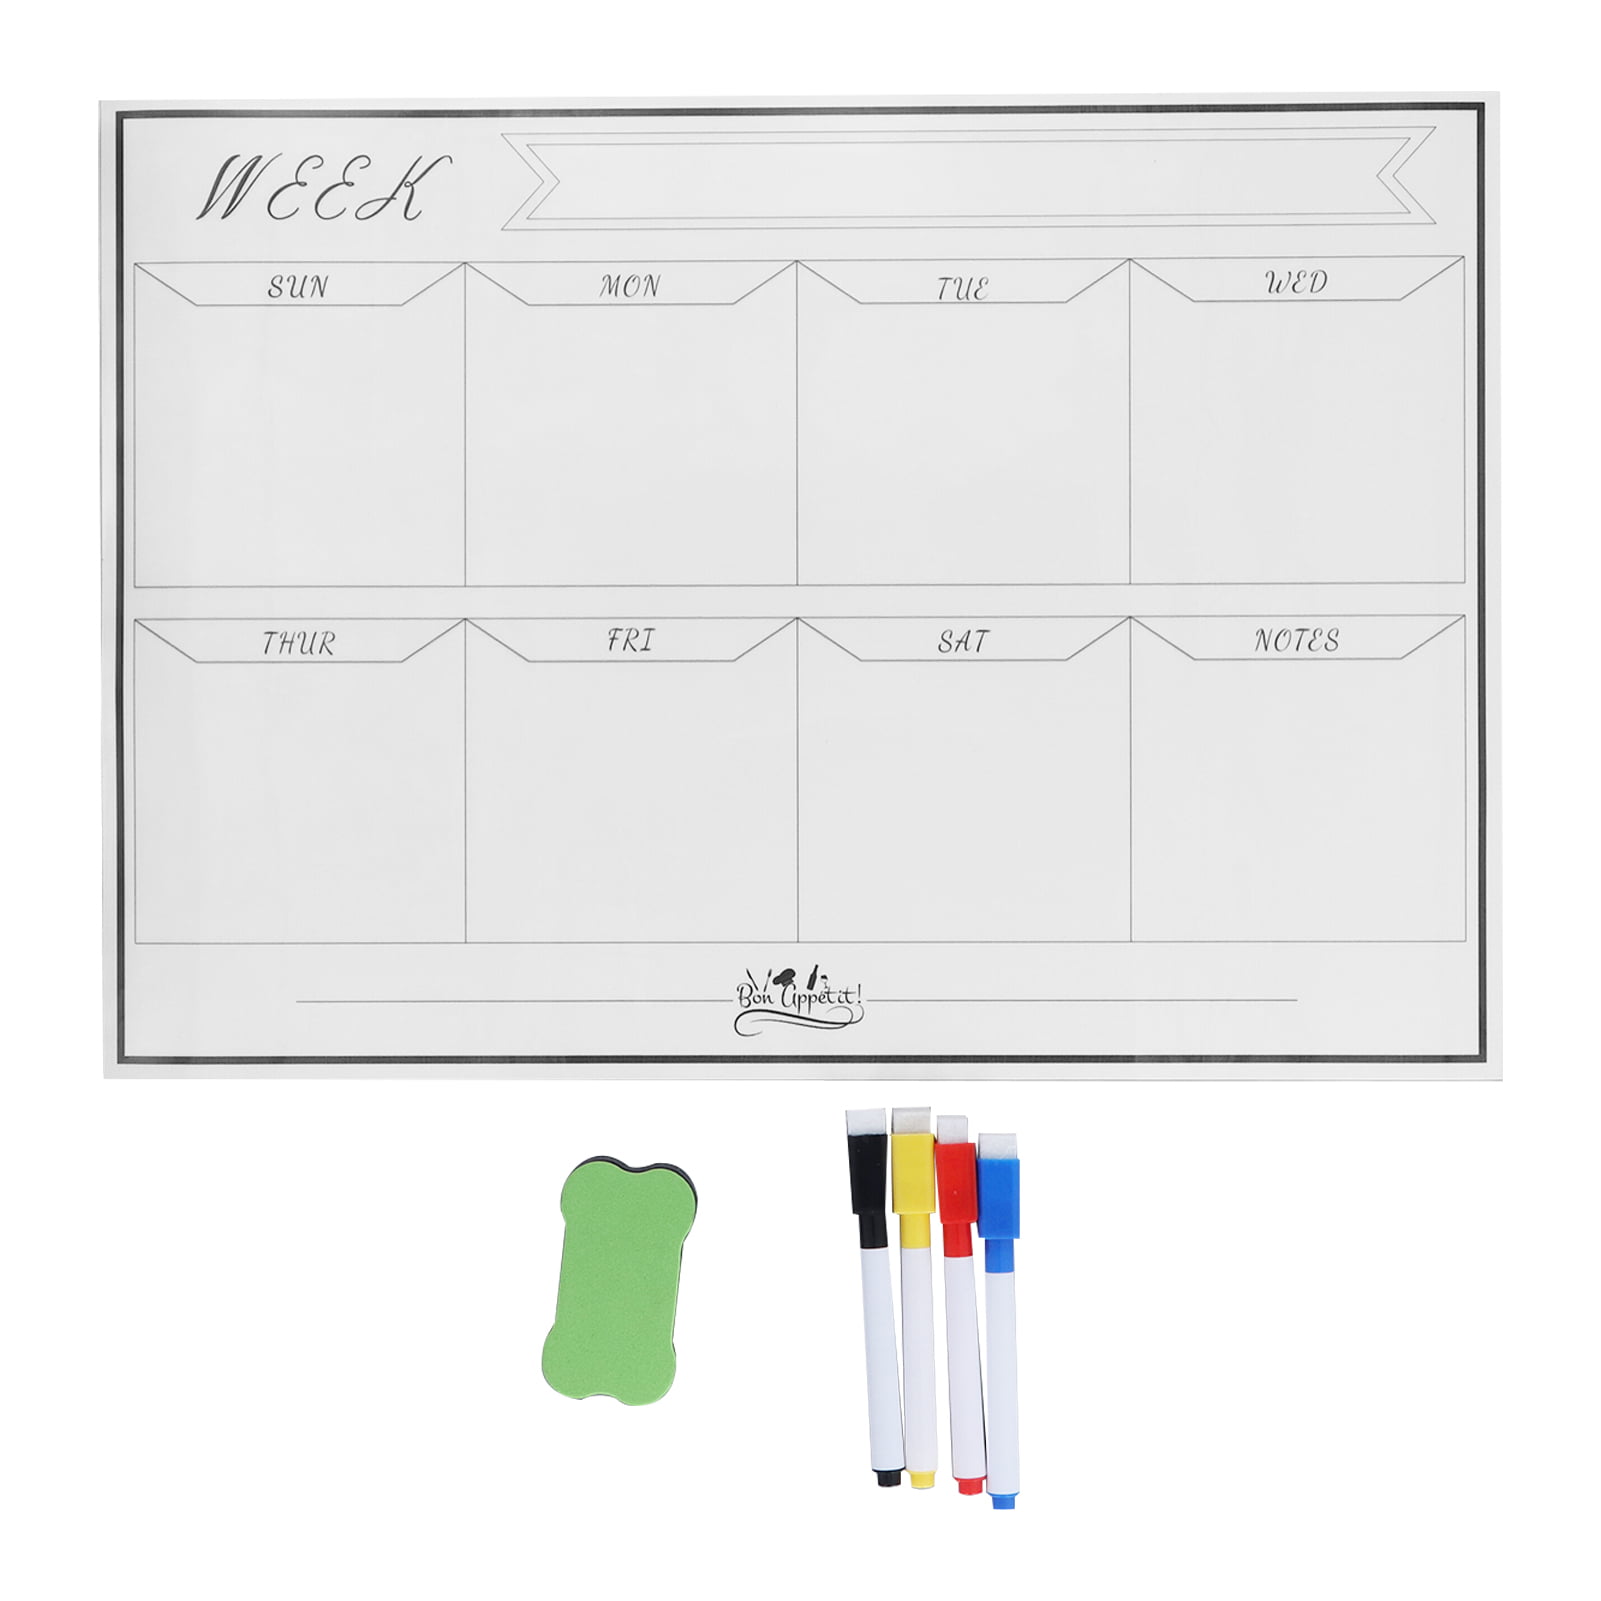 Kassa Large Whiteboard Wall Sticker Roll - 17.3 x 96? (8 Feet) - 3 Dry  Erase Board Markers Included - Adhesive White Board Wallpaper for Fridge,  Office & Kids Room - Peel and Stick Paper De 